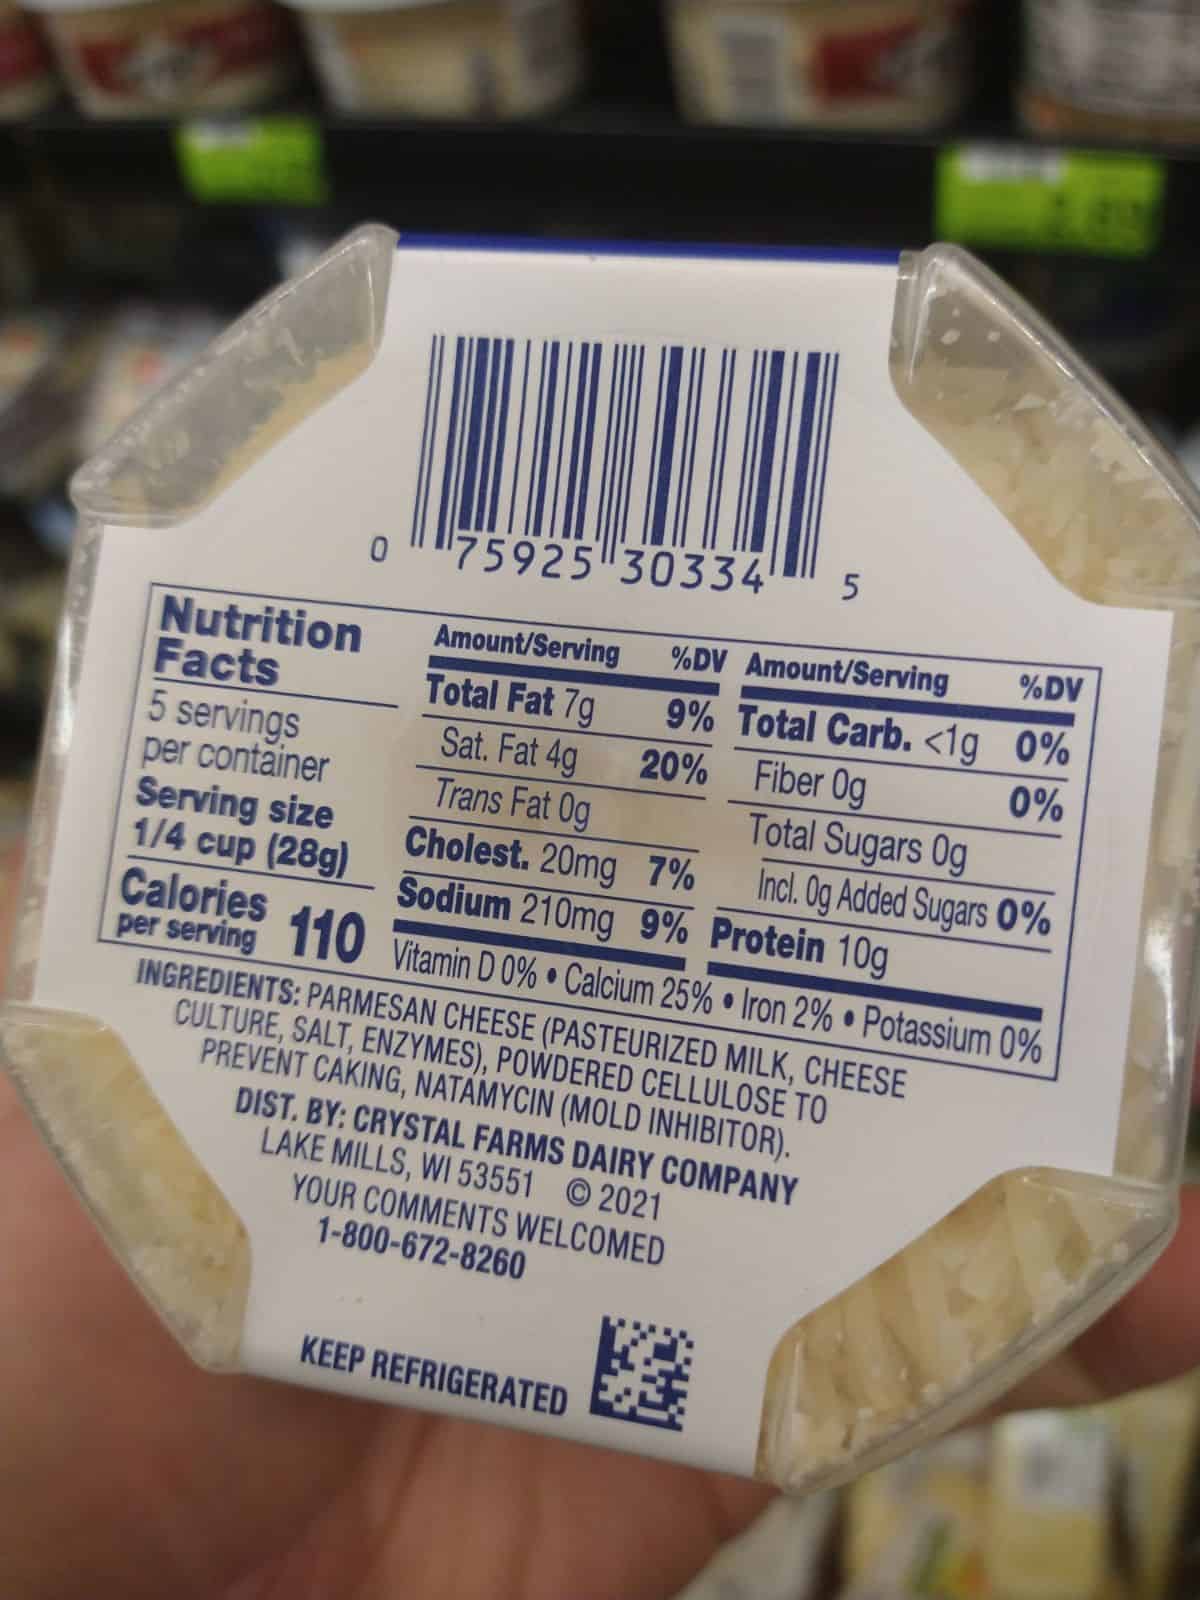 The back of a container of Crystal Farms shredded parmesan cheese is being held at the grocery store. The ingredients include Parmesan cheese, powdered cellulose to prevent caking, and natamycin (mold inhibitor). 